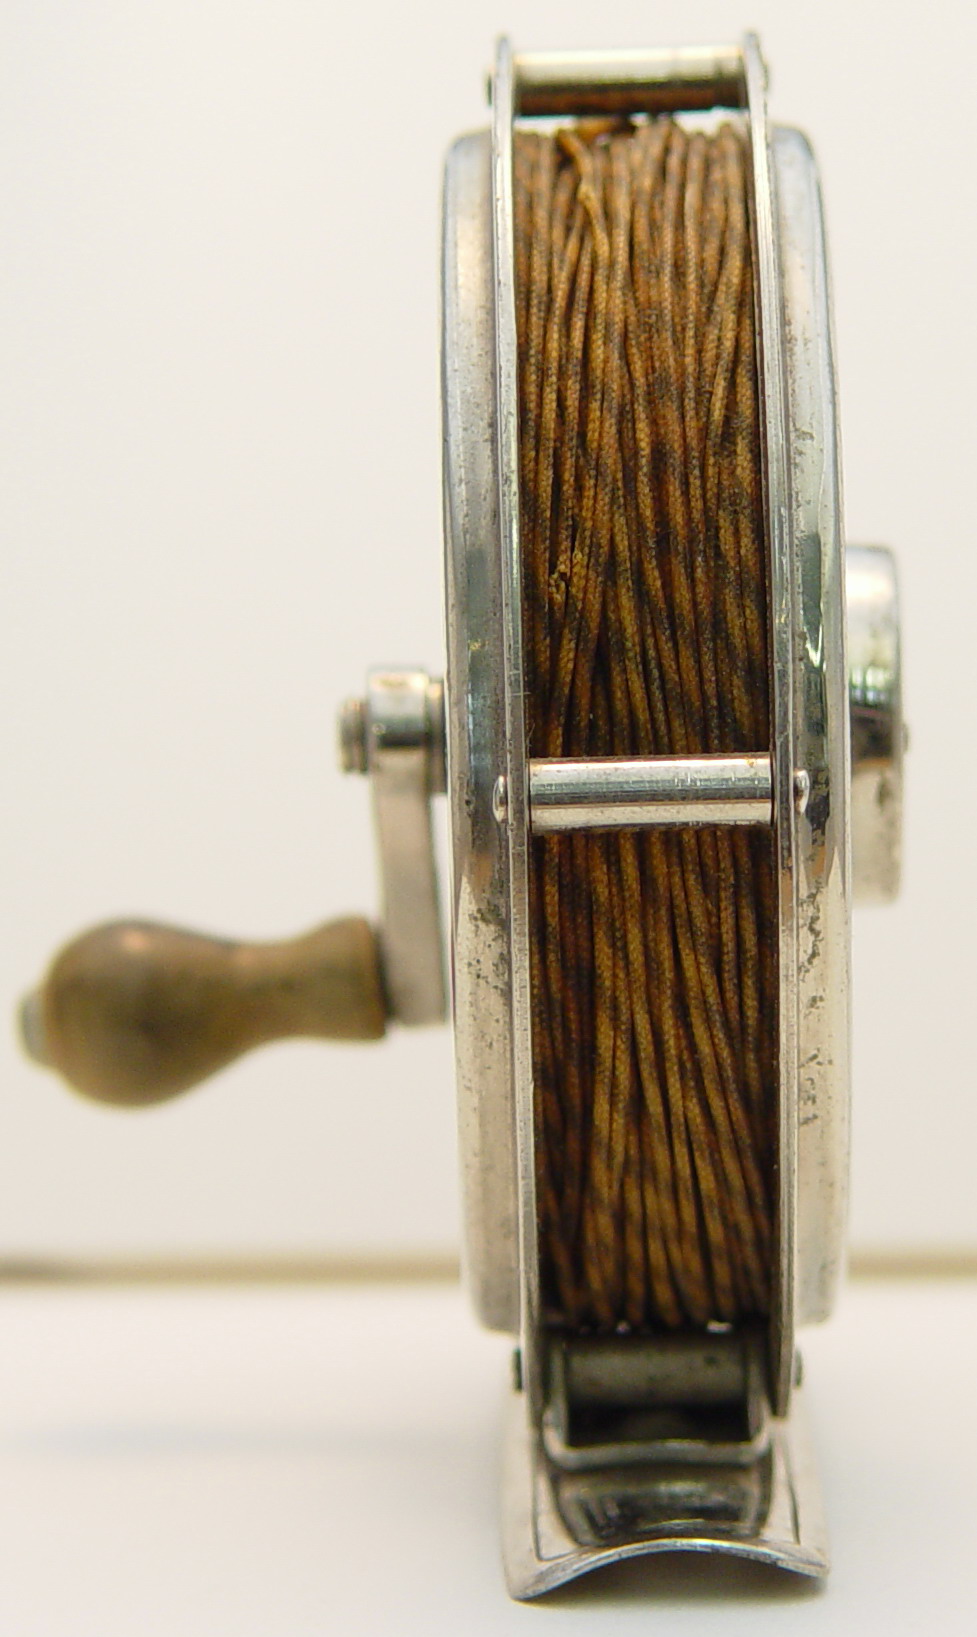 Museum Piece: An Extremely Rare Fly Reel - Orvis News